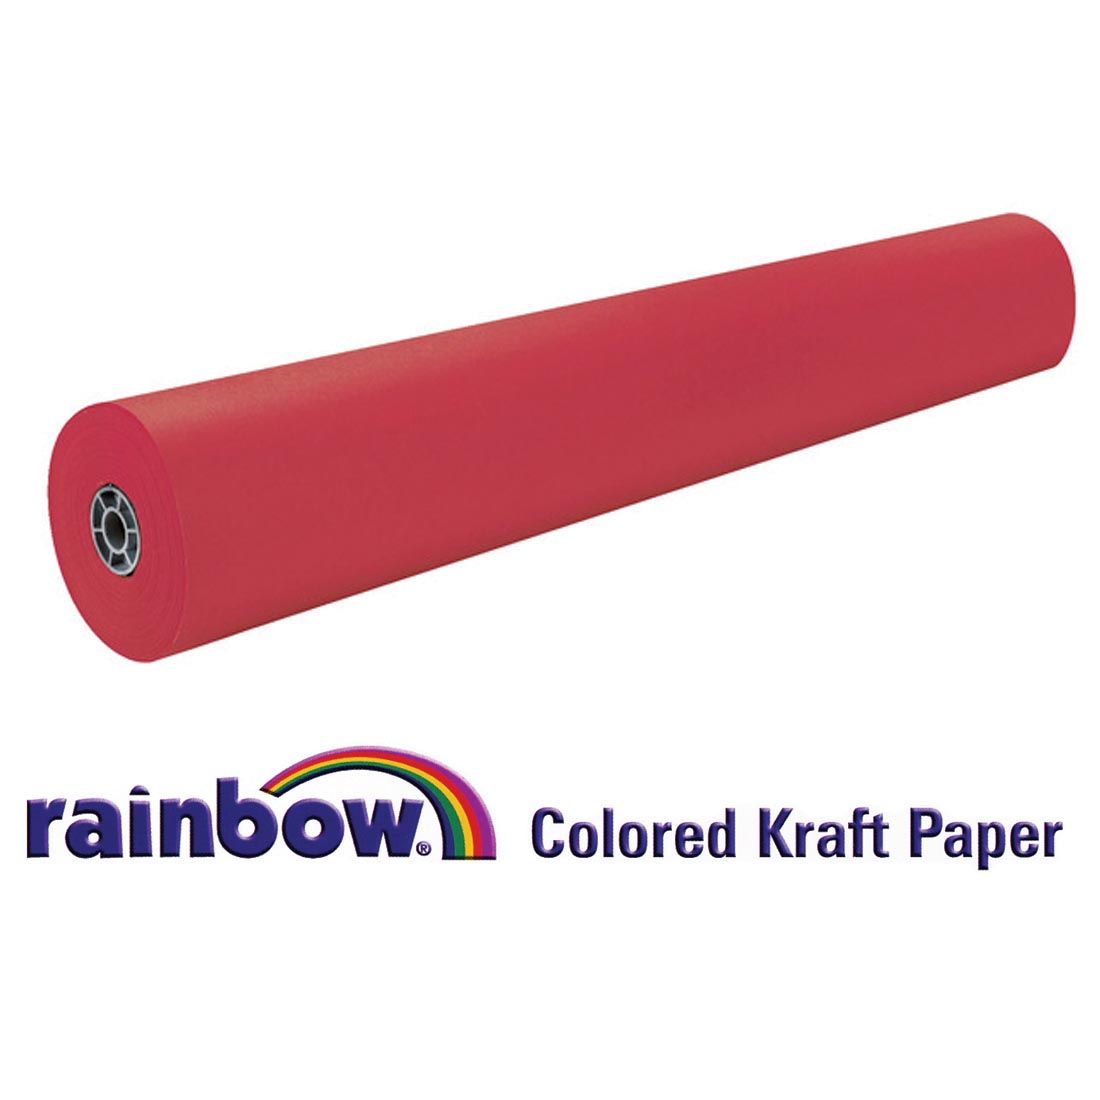 Roll of Flame Paper with text Rainbow Colored Kraft Paper